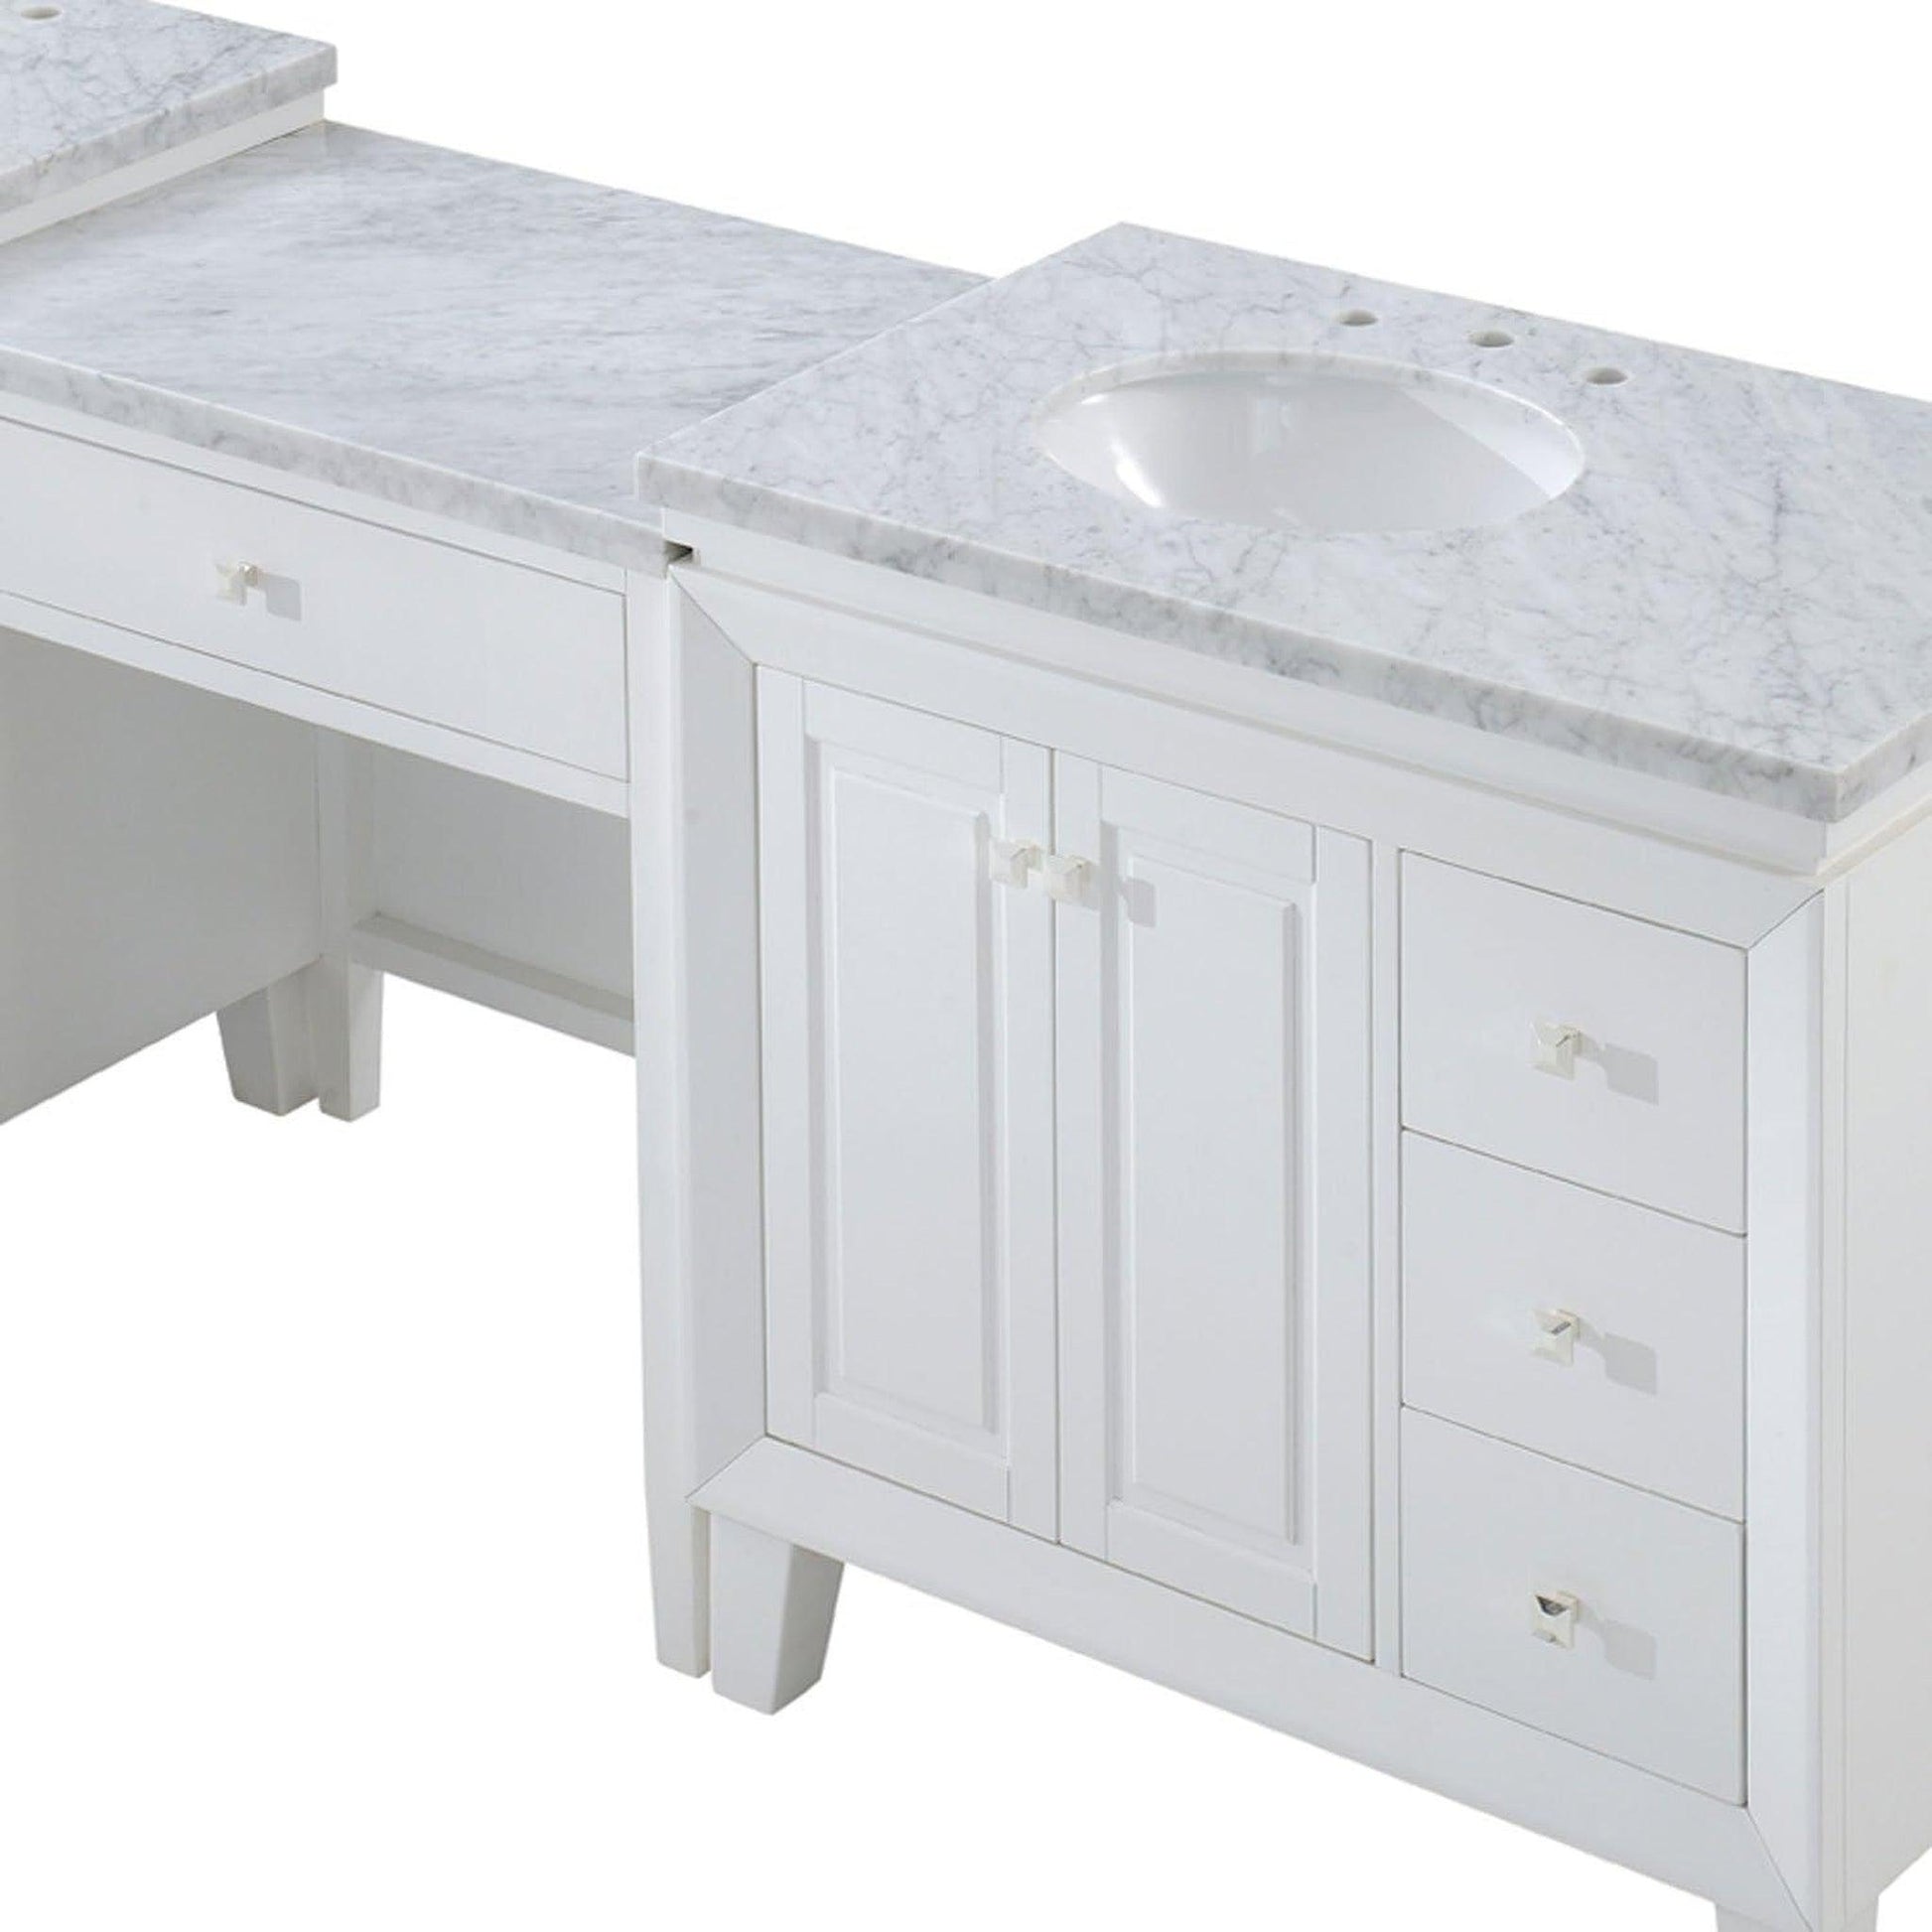 Silkroad Exclusive 103" Double Sink White Modular Bathroom Vanity With Carrara White Marble Countertop and White Ceramic Undermount Sink